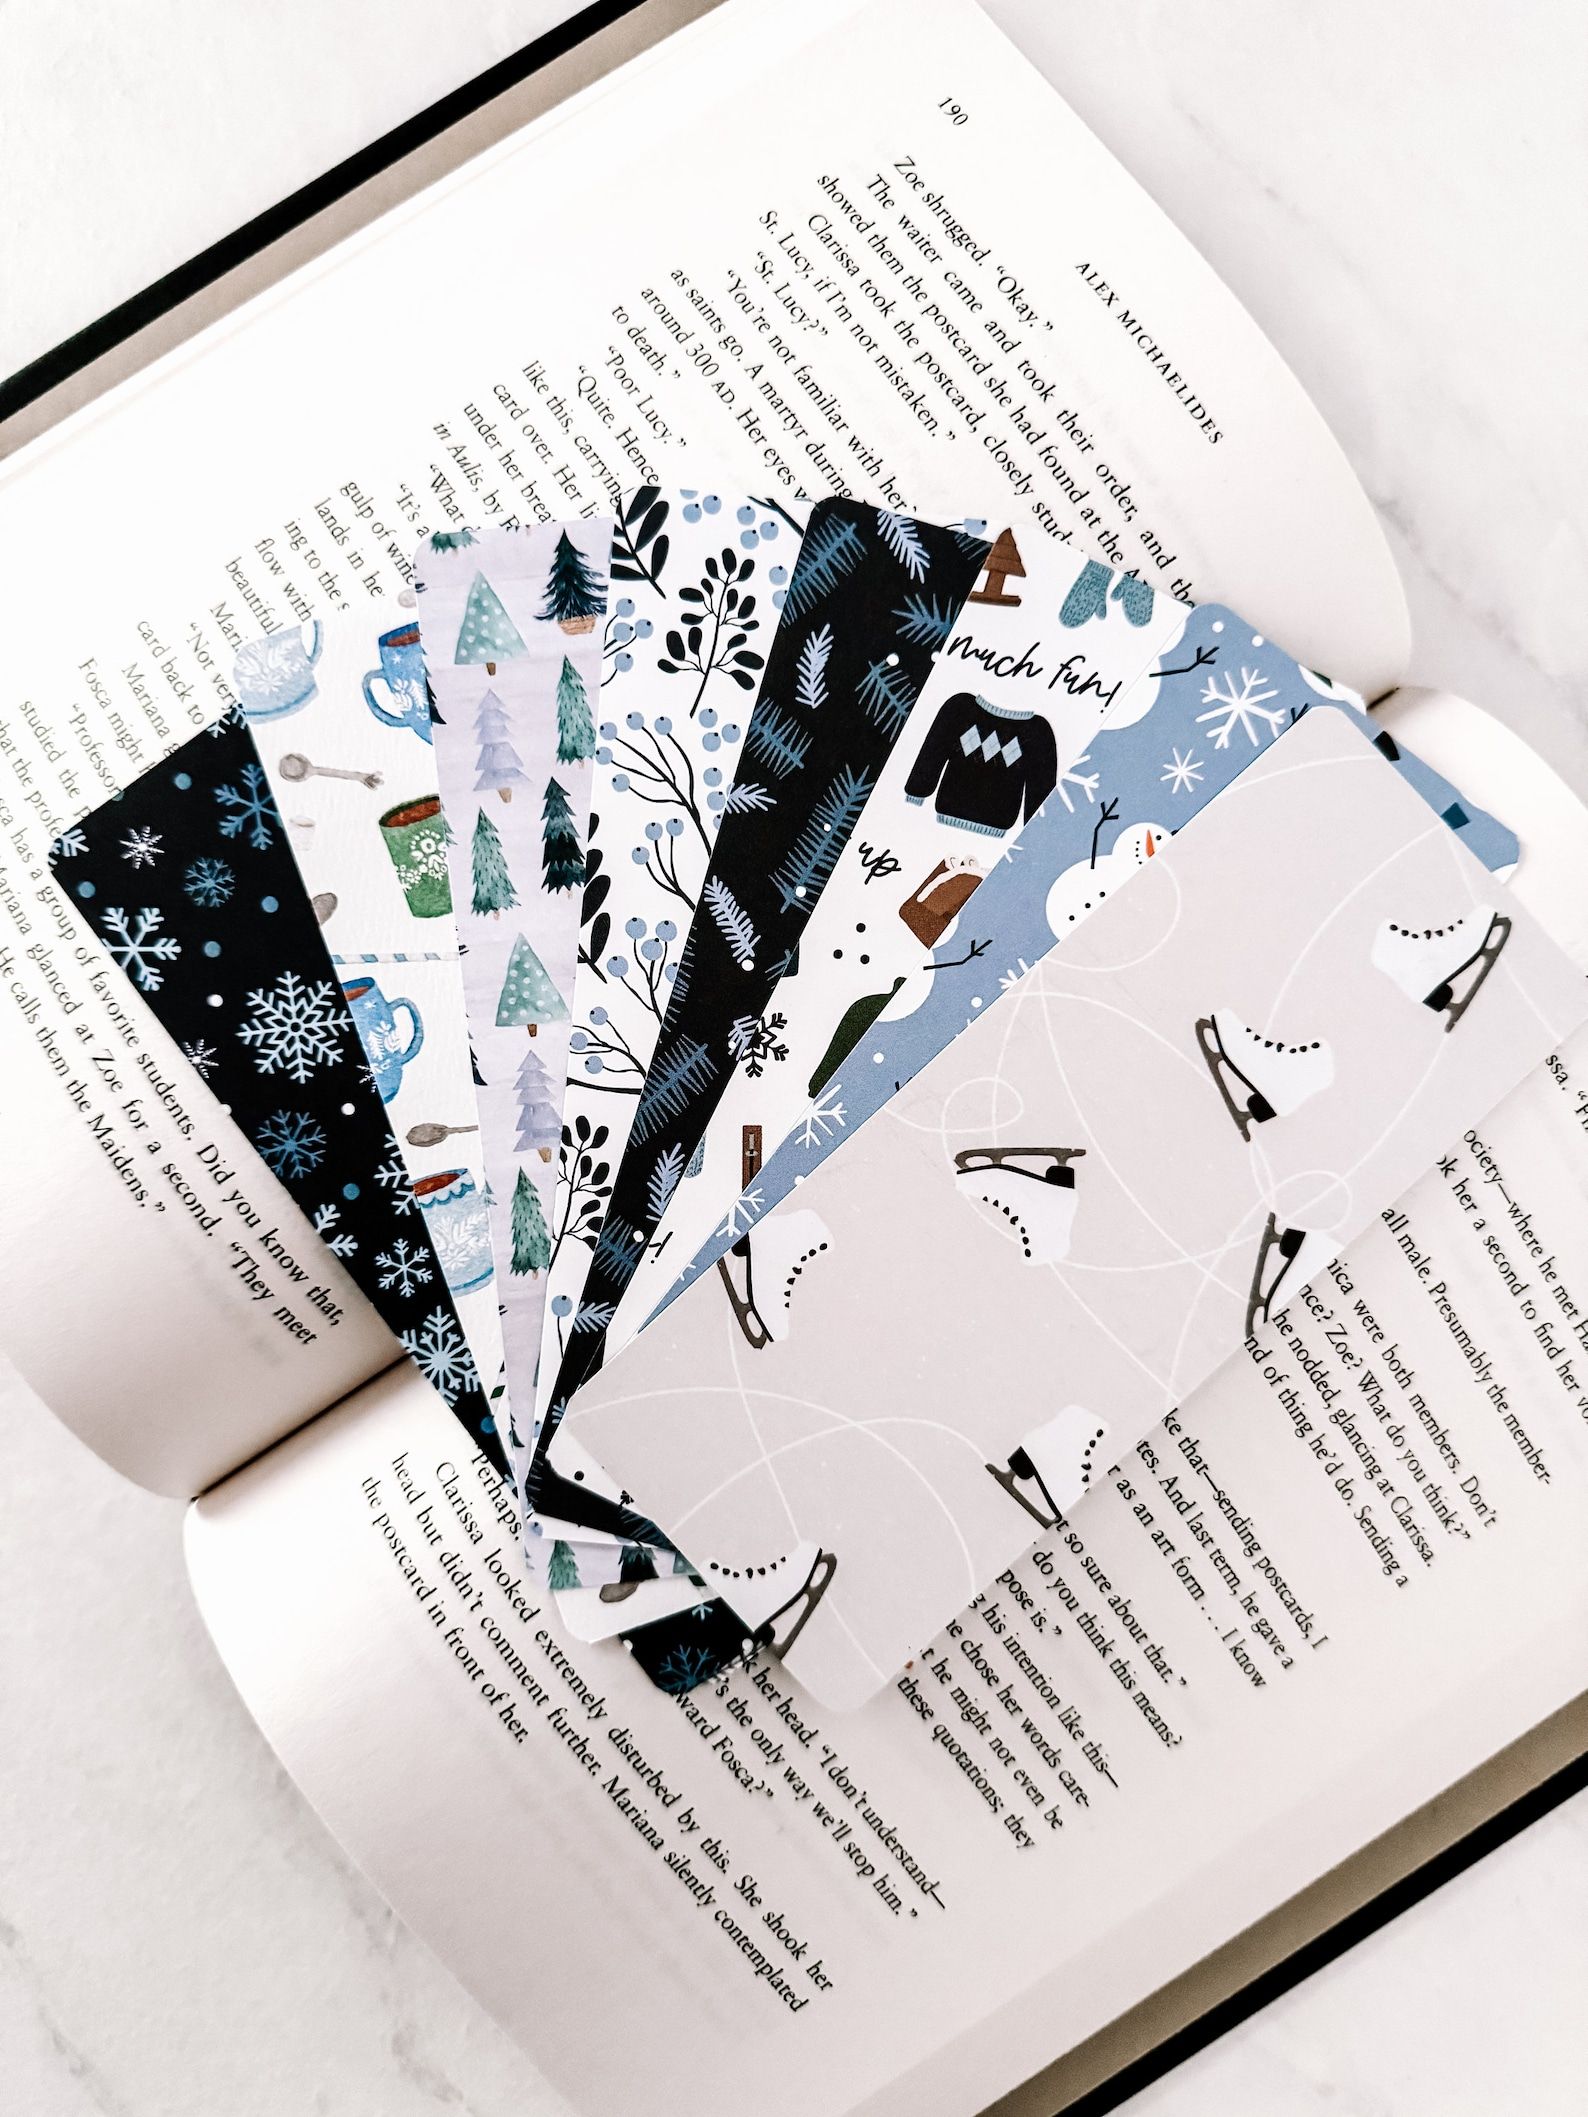 An array of seven bookmarks in blue hues that depict various winter activities